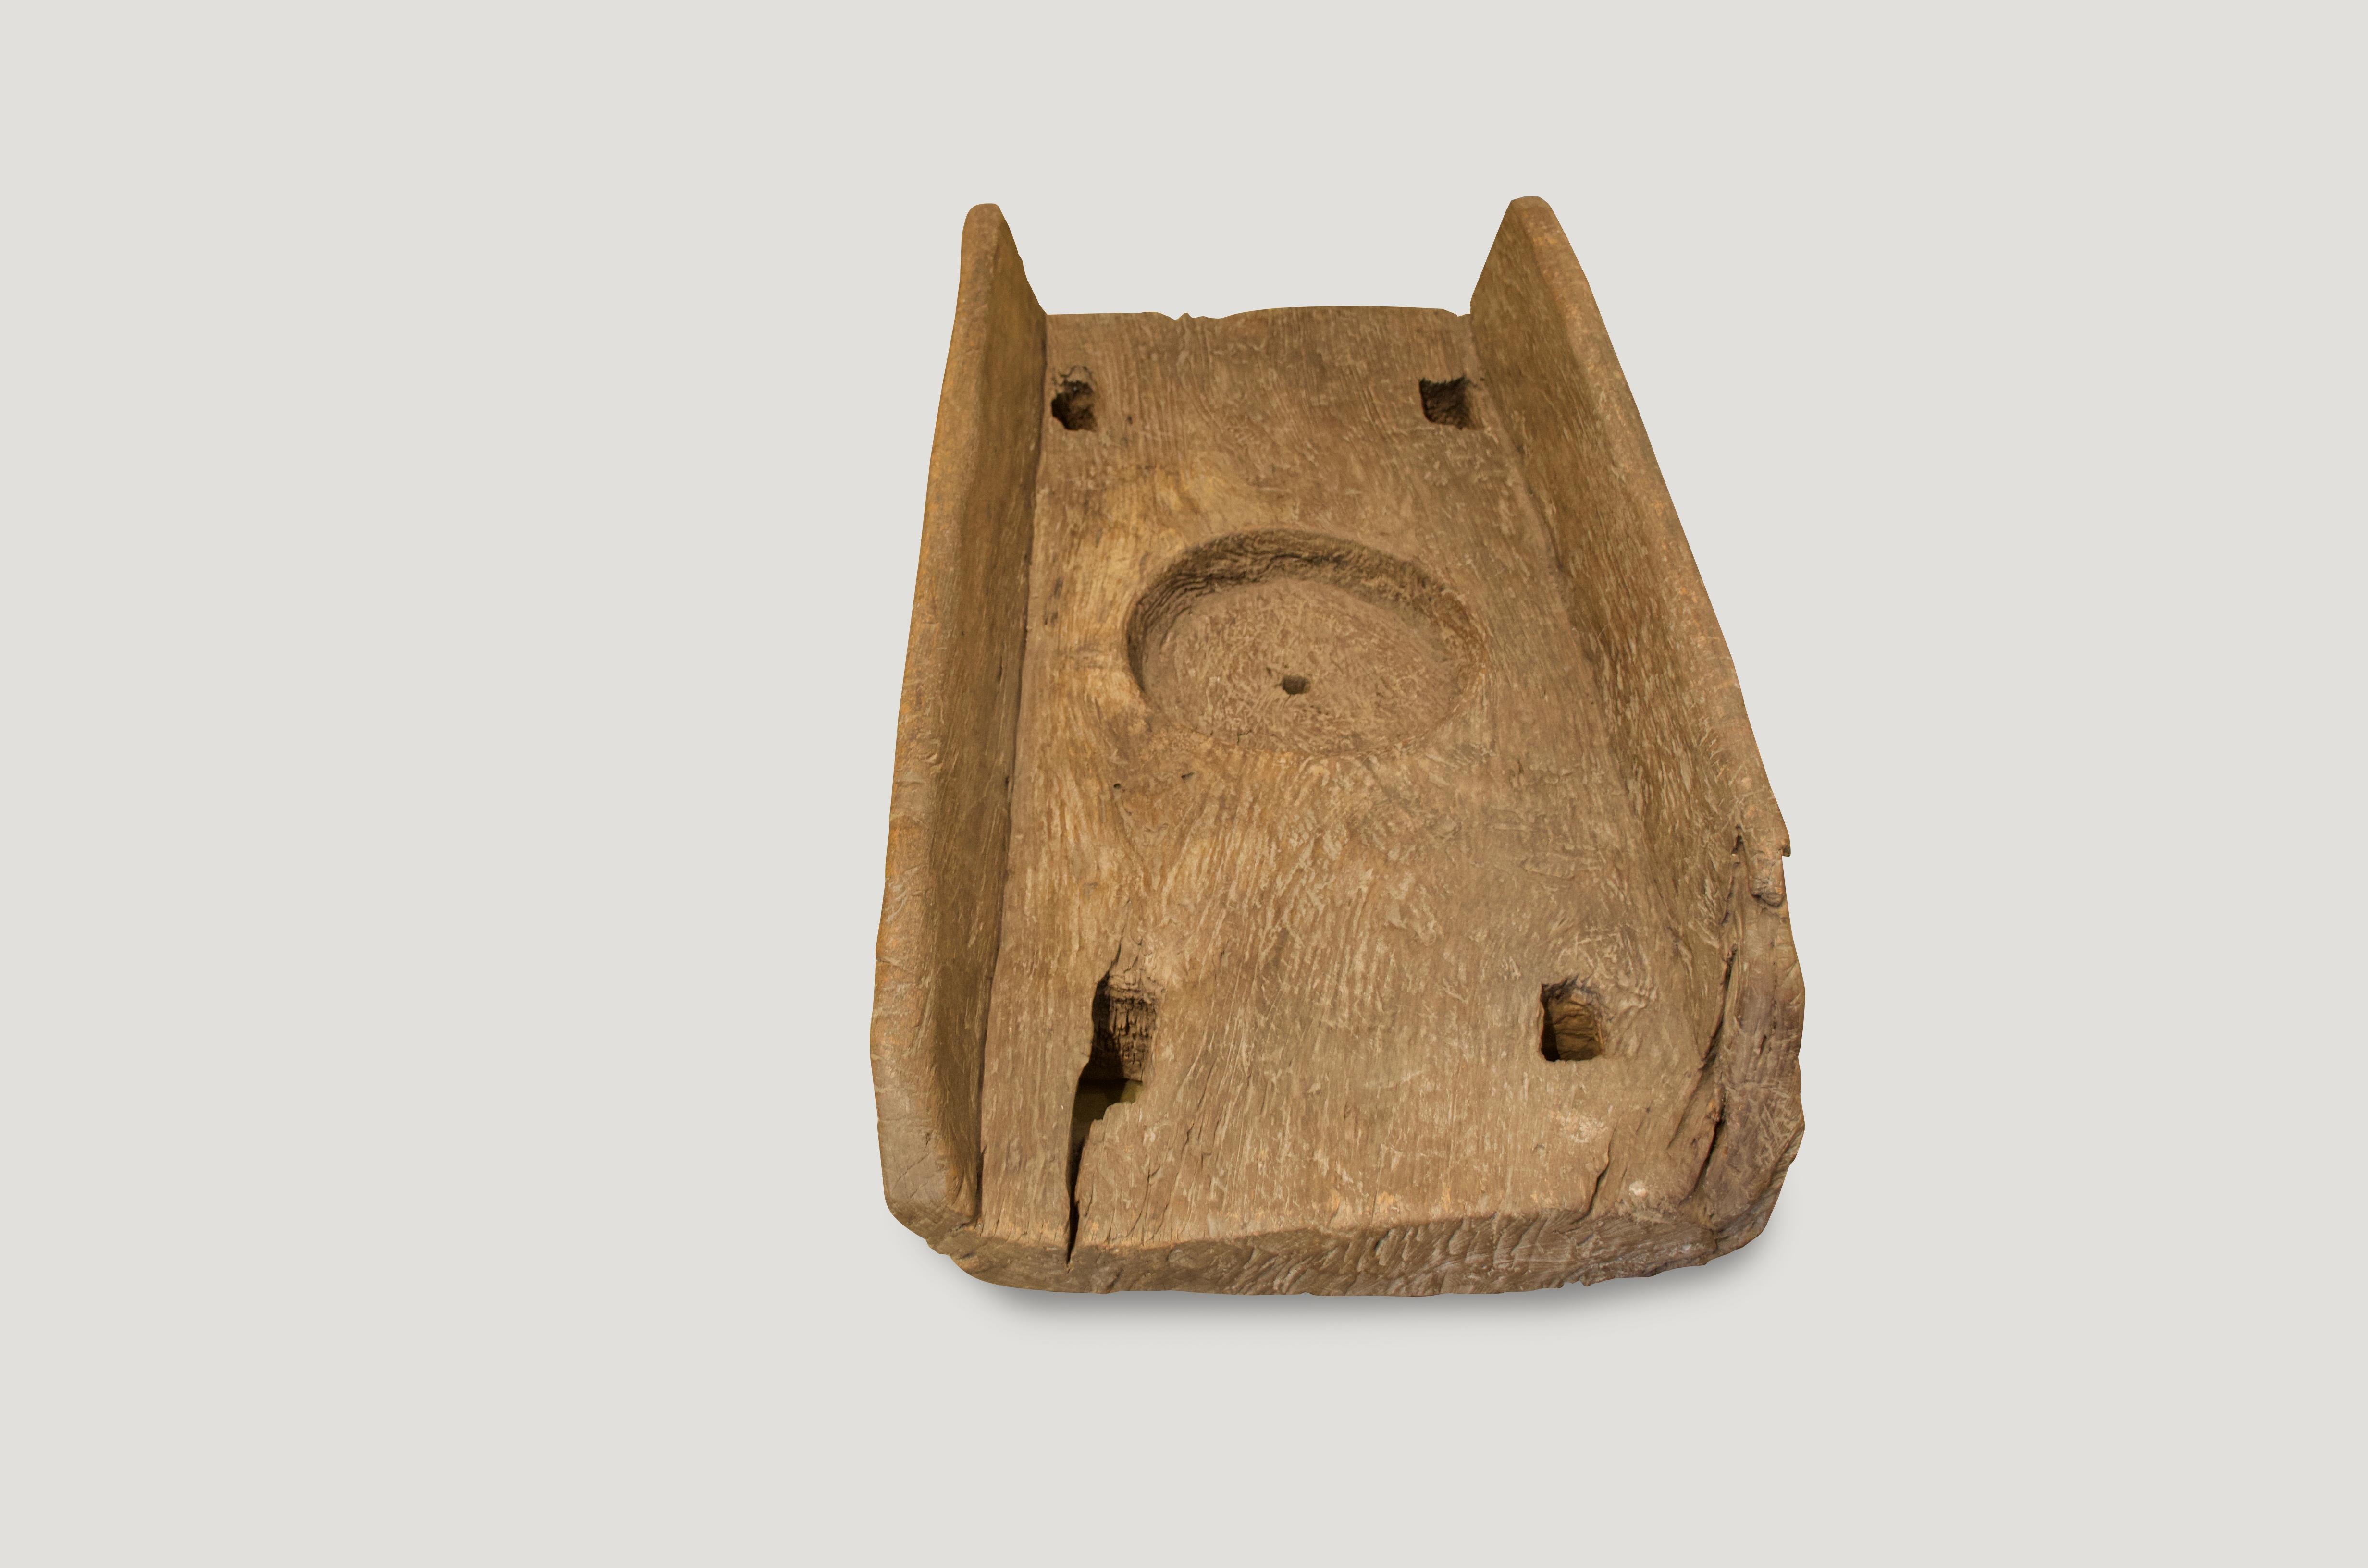 Andrianna Shamaris Antique Teak Wood Rice Pounder In Good Condition For Sale In New York, NY